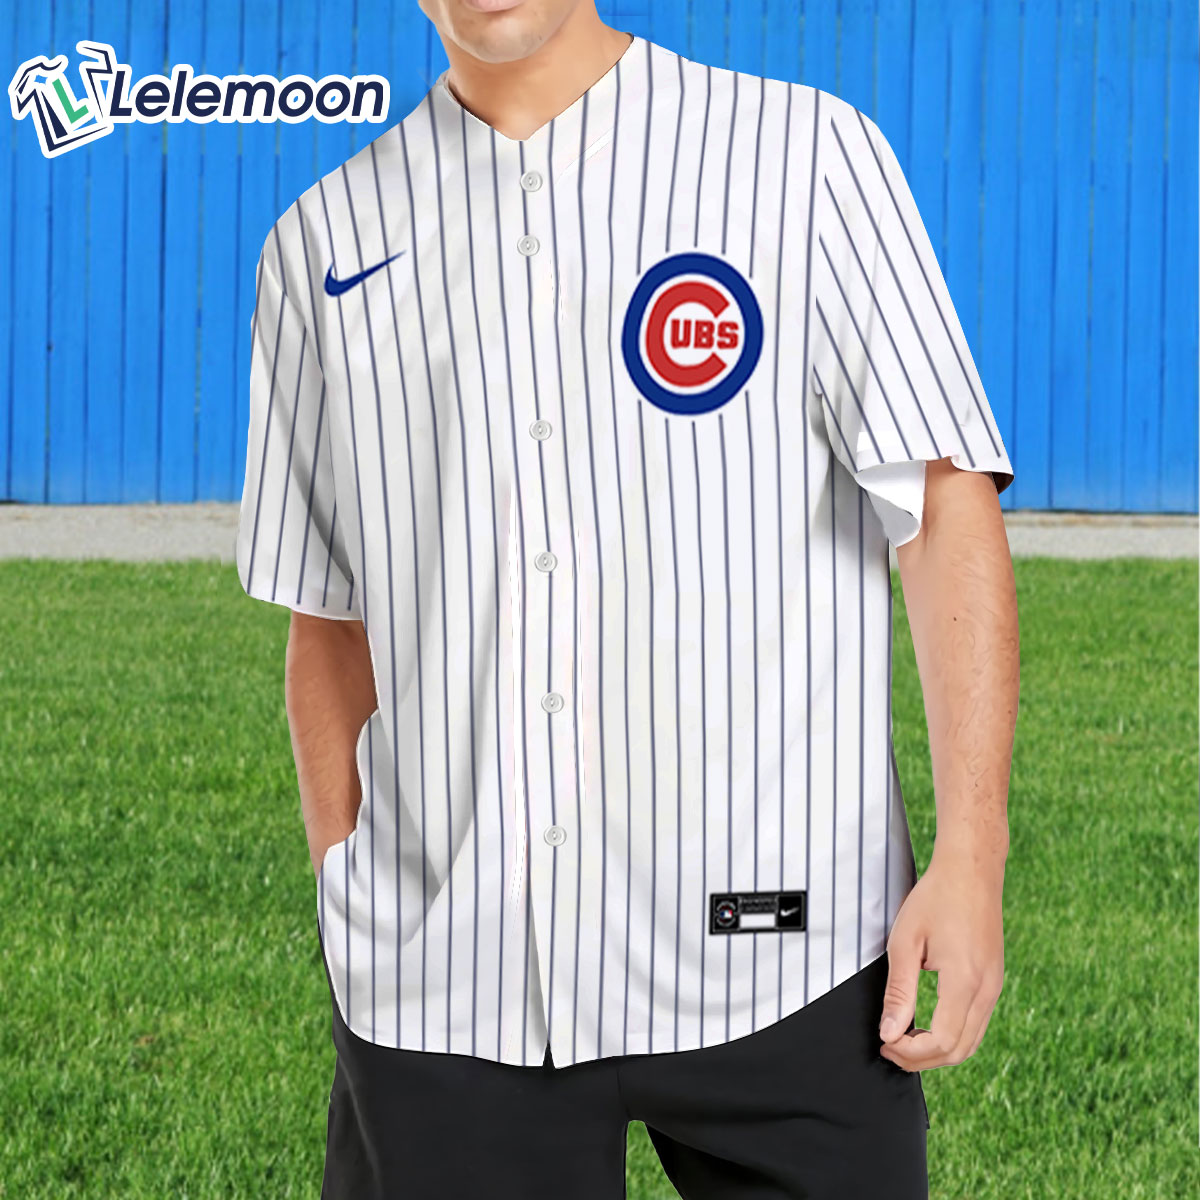 Official Custom Chicago Cubs Baseball Jerseys, Personalized Cubs